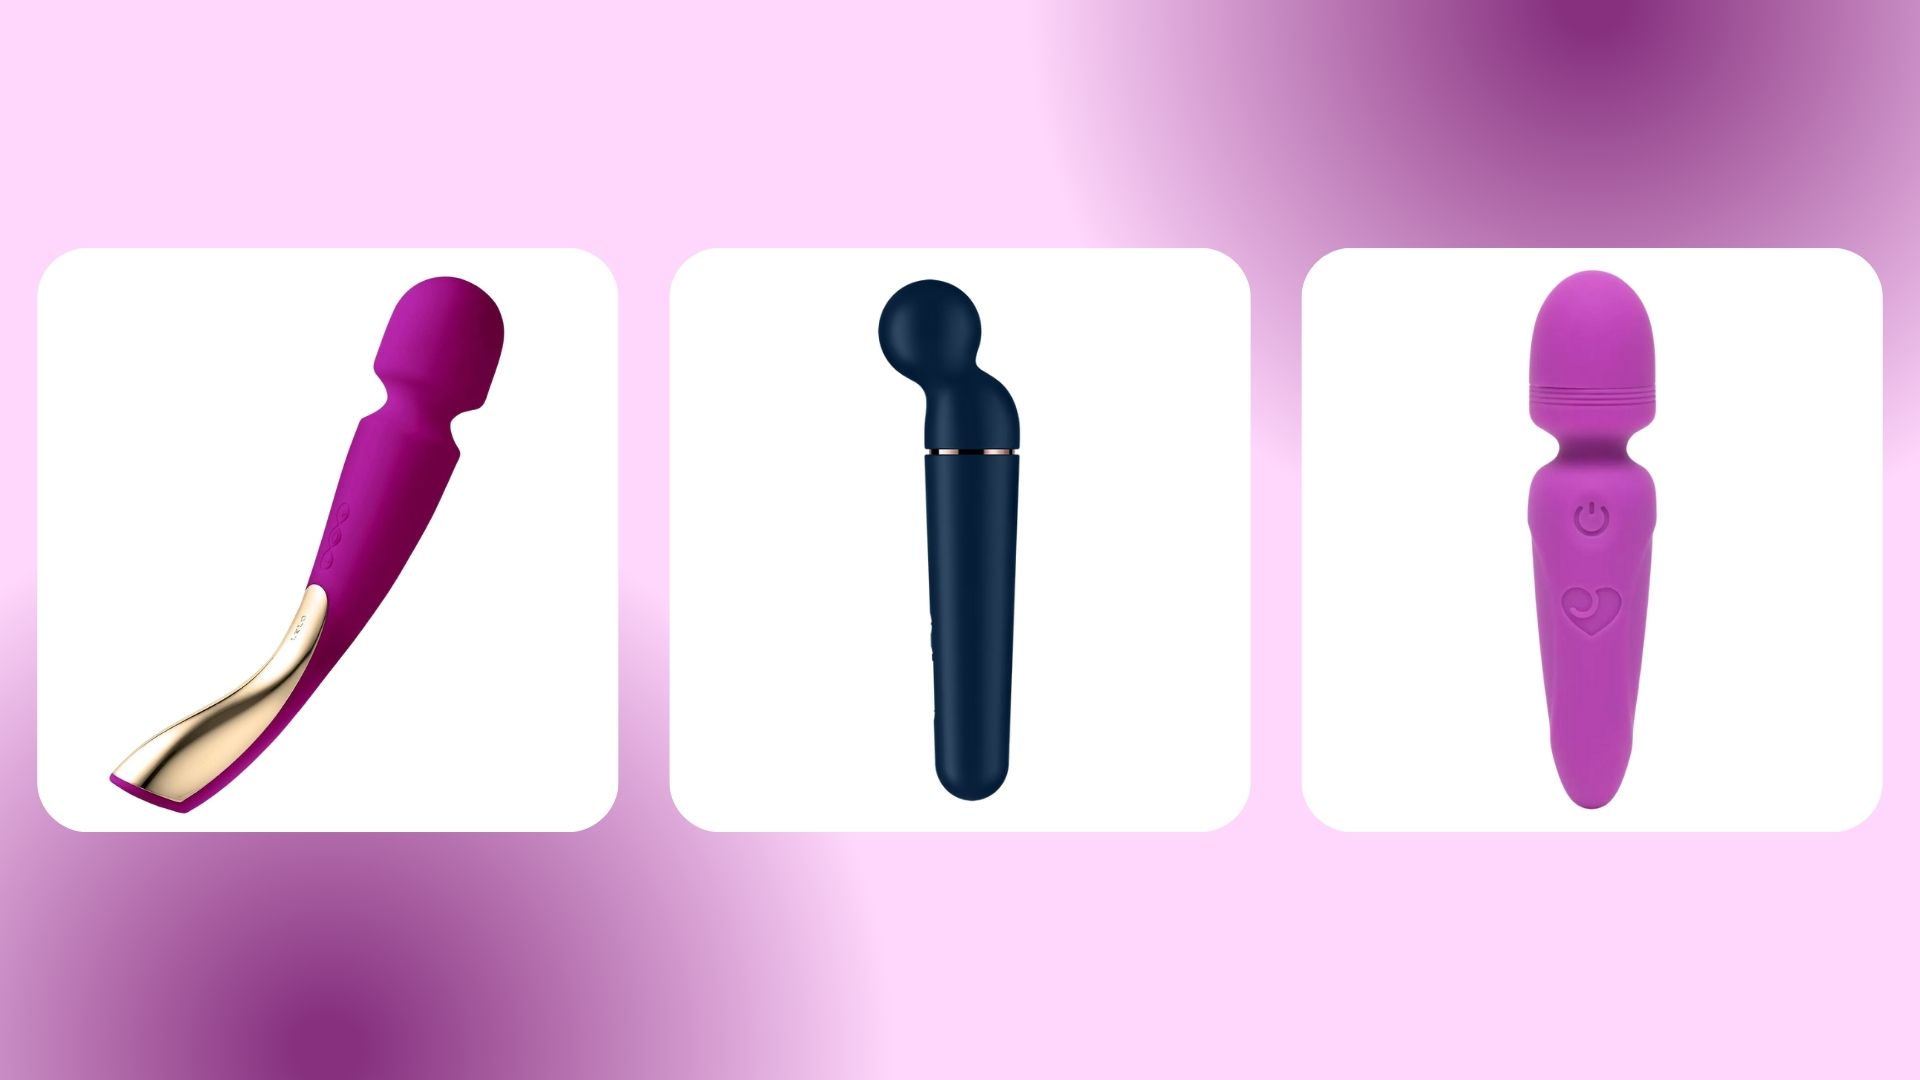 Best wand vibrators 14 best buys for couples and solo fun Woman and Home pic